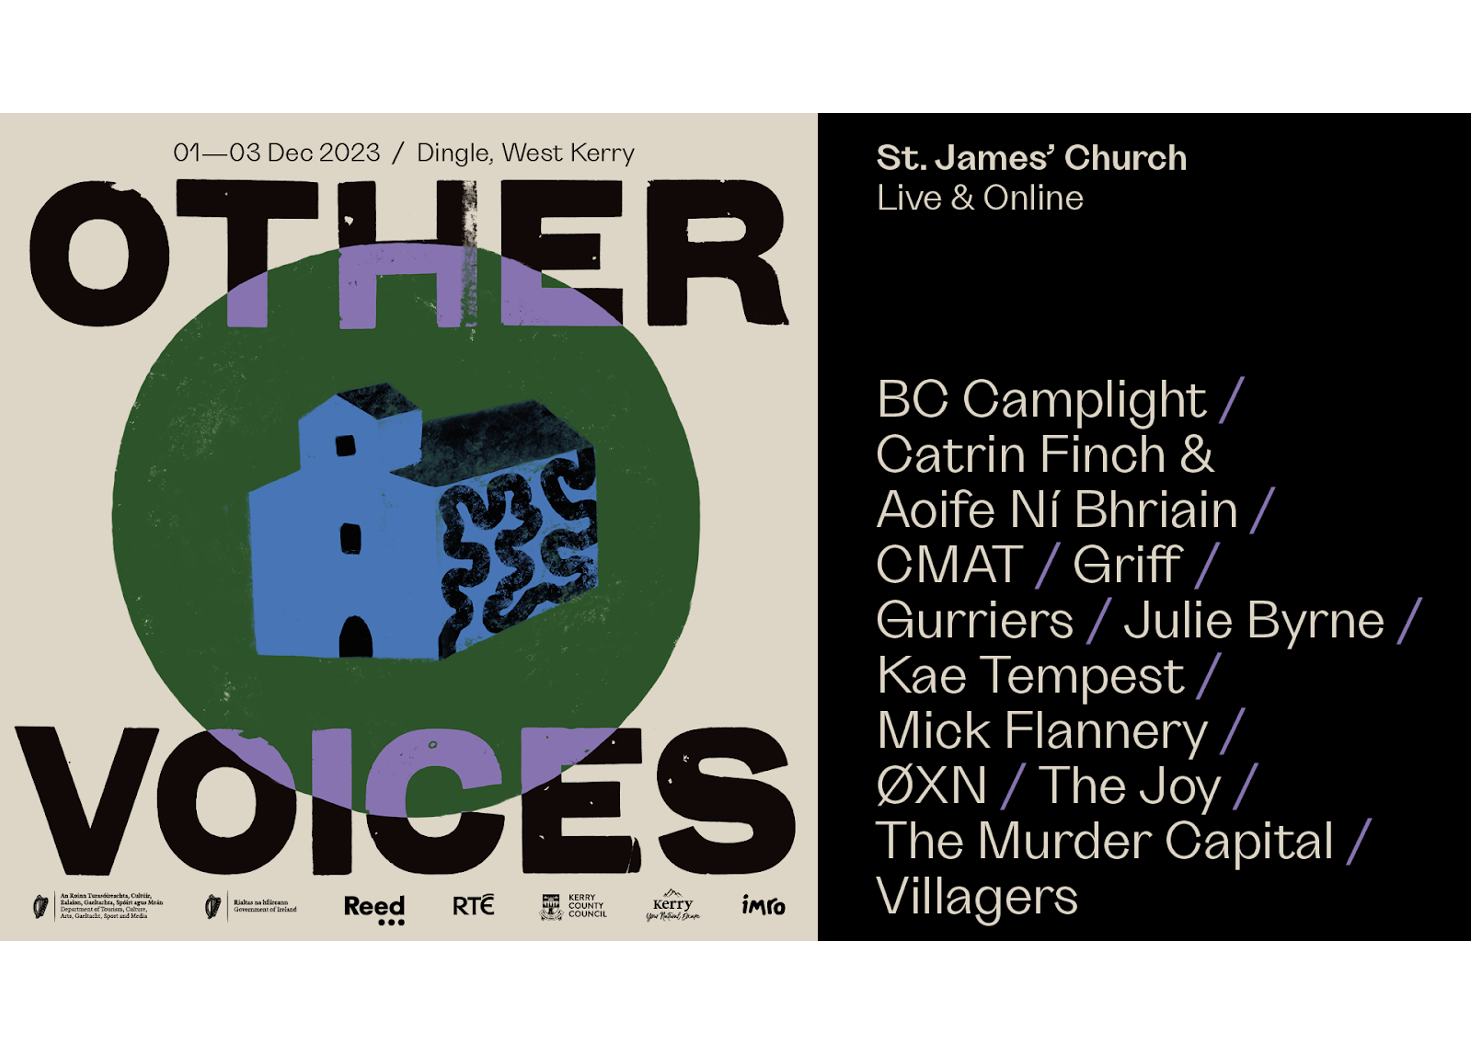 Other Voices 2023: New Headliners – Kae Tempest, Griff, Villagers, The Murder Capital, BC Camplight